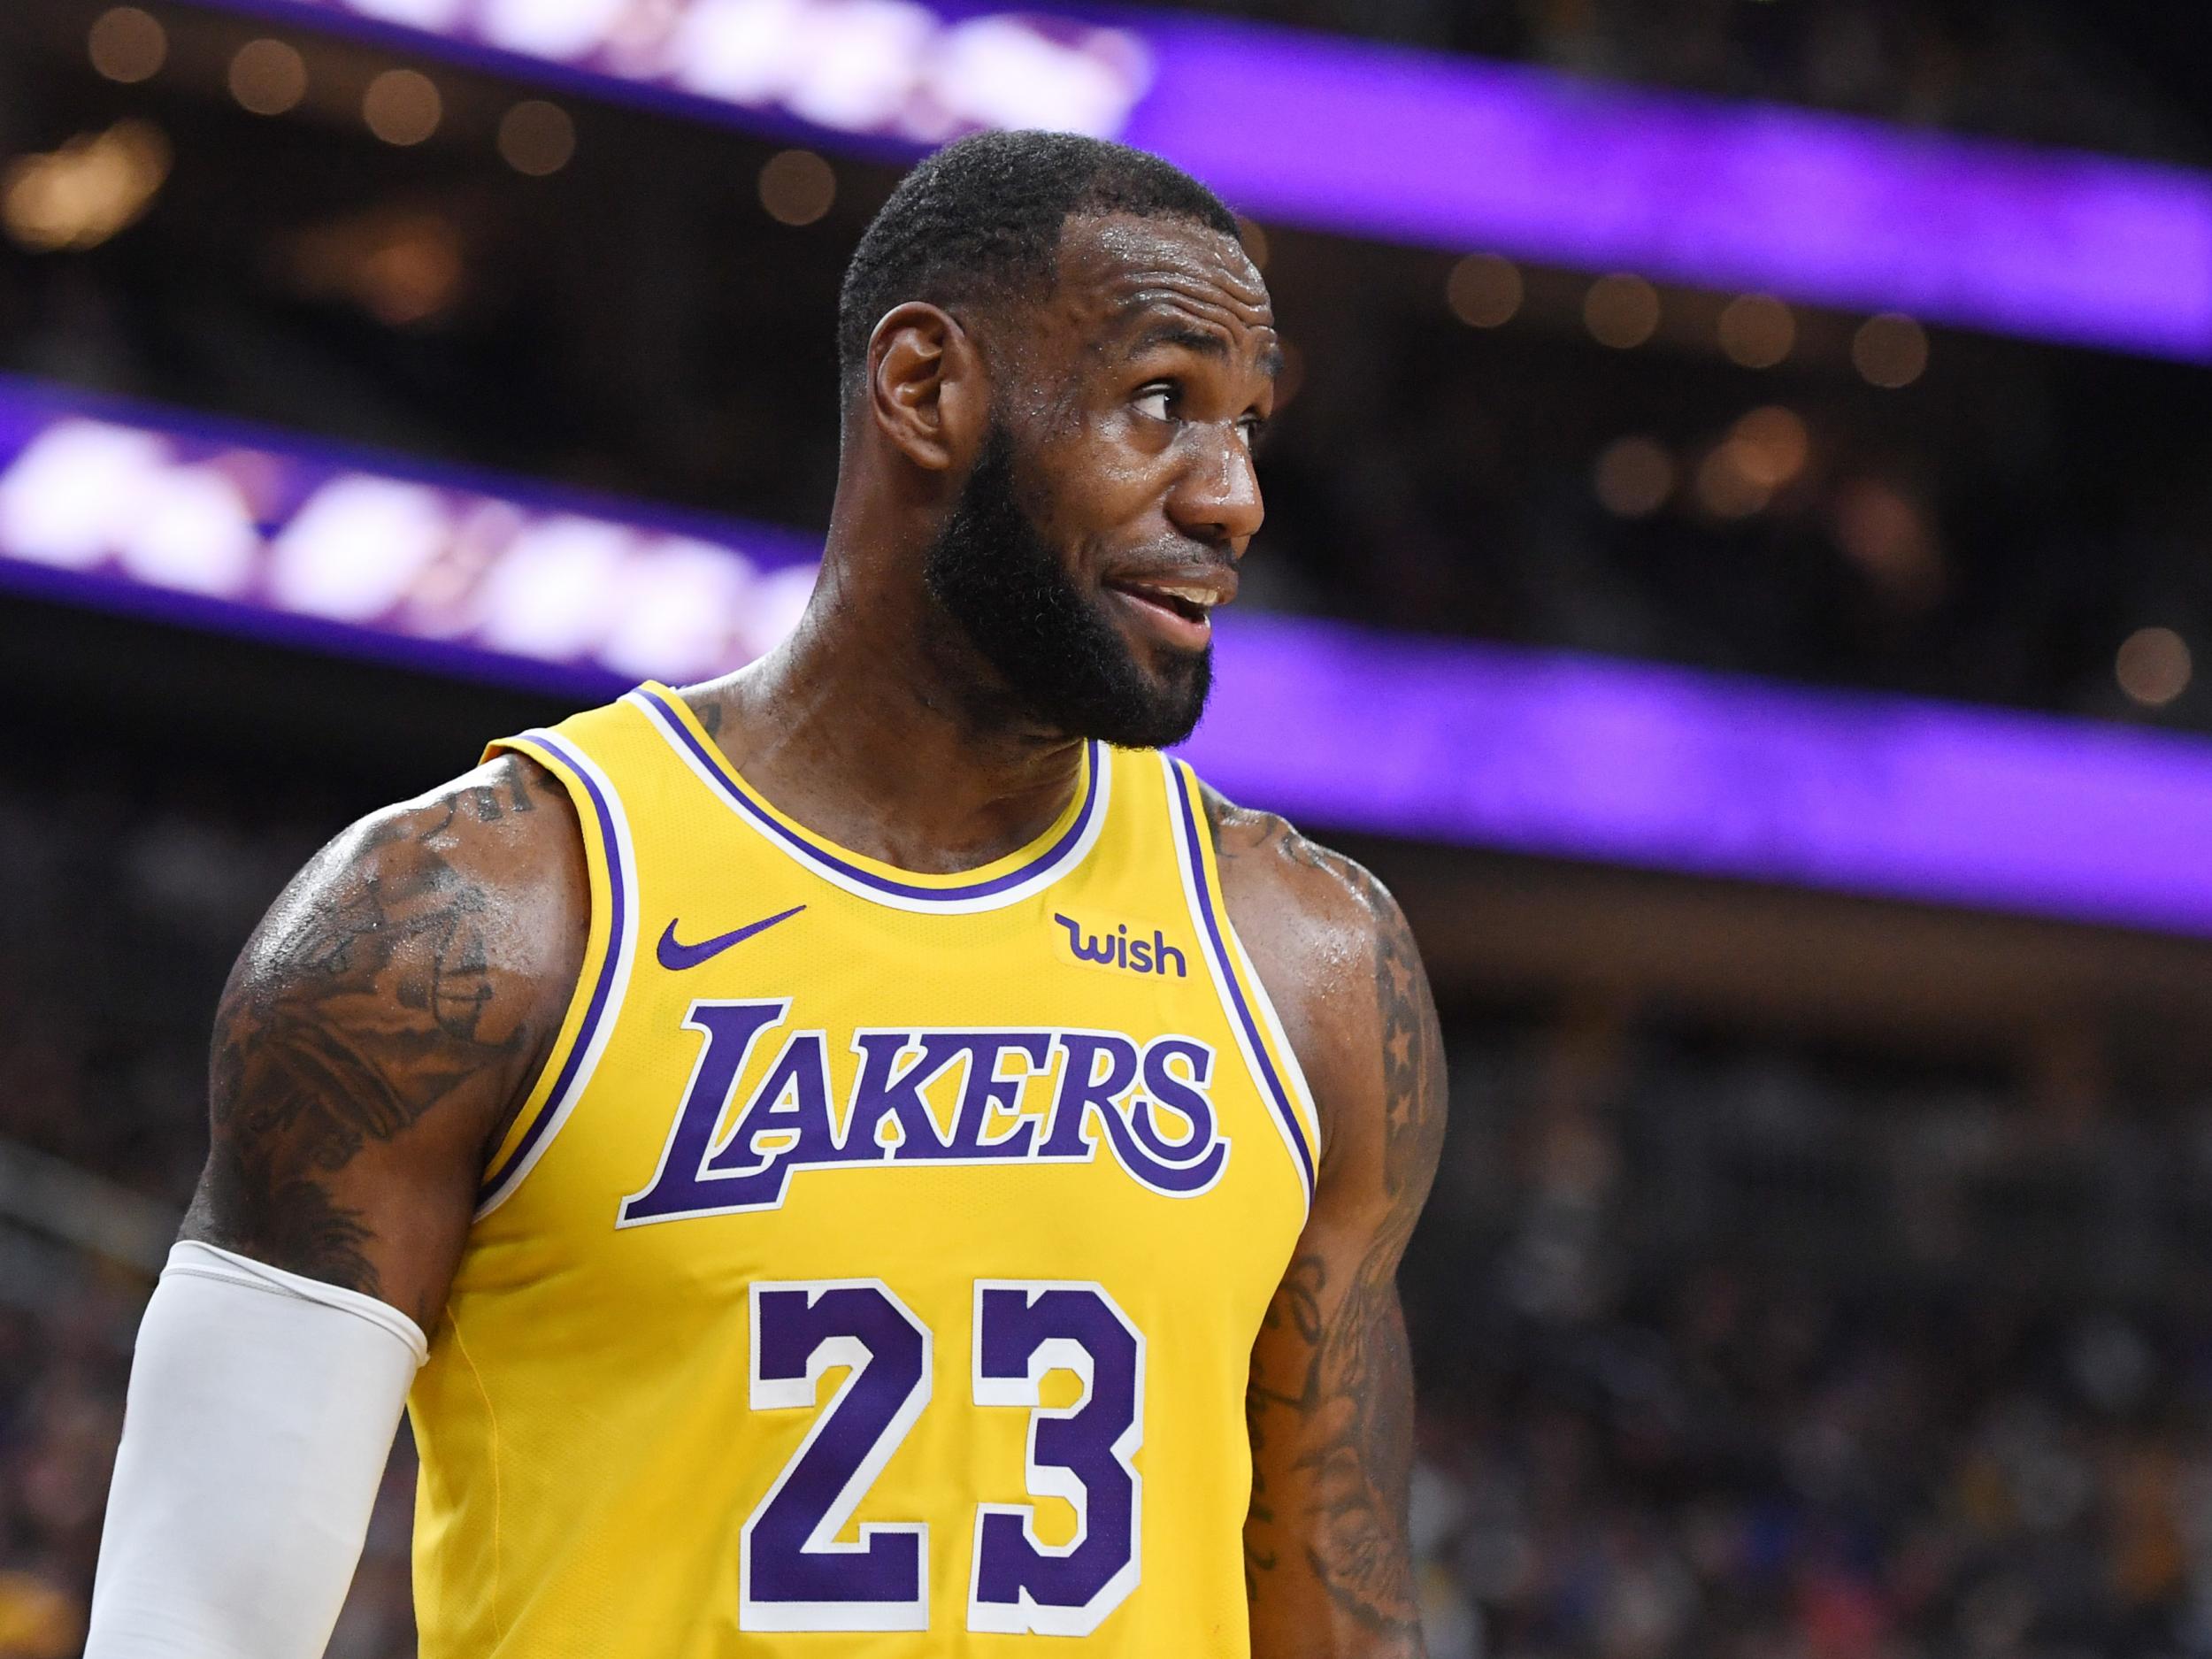 LeBron James says he would never condone violence against police